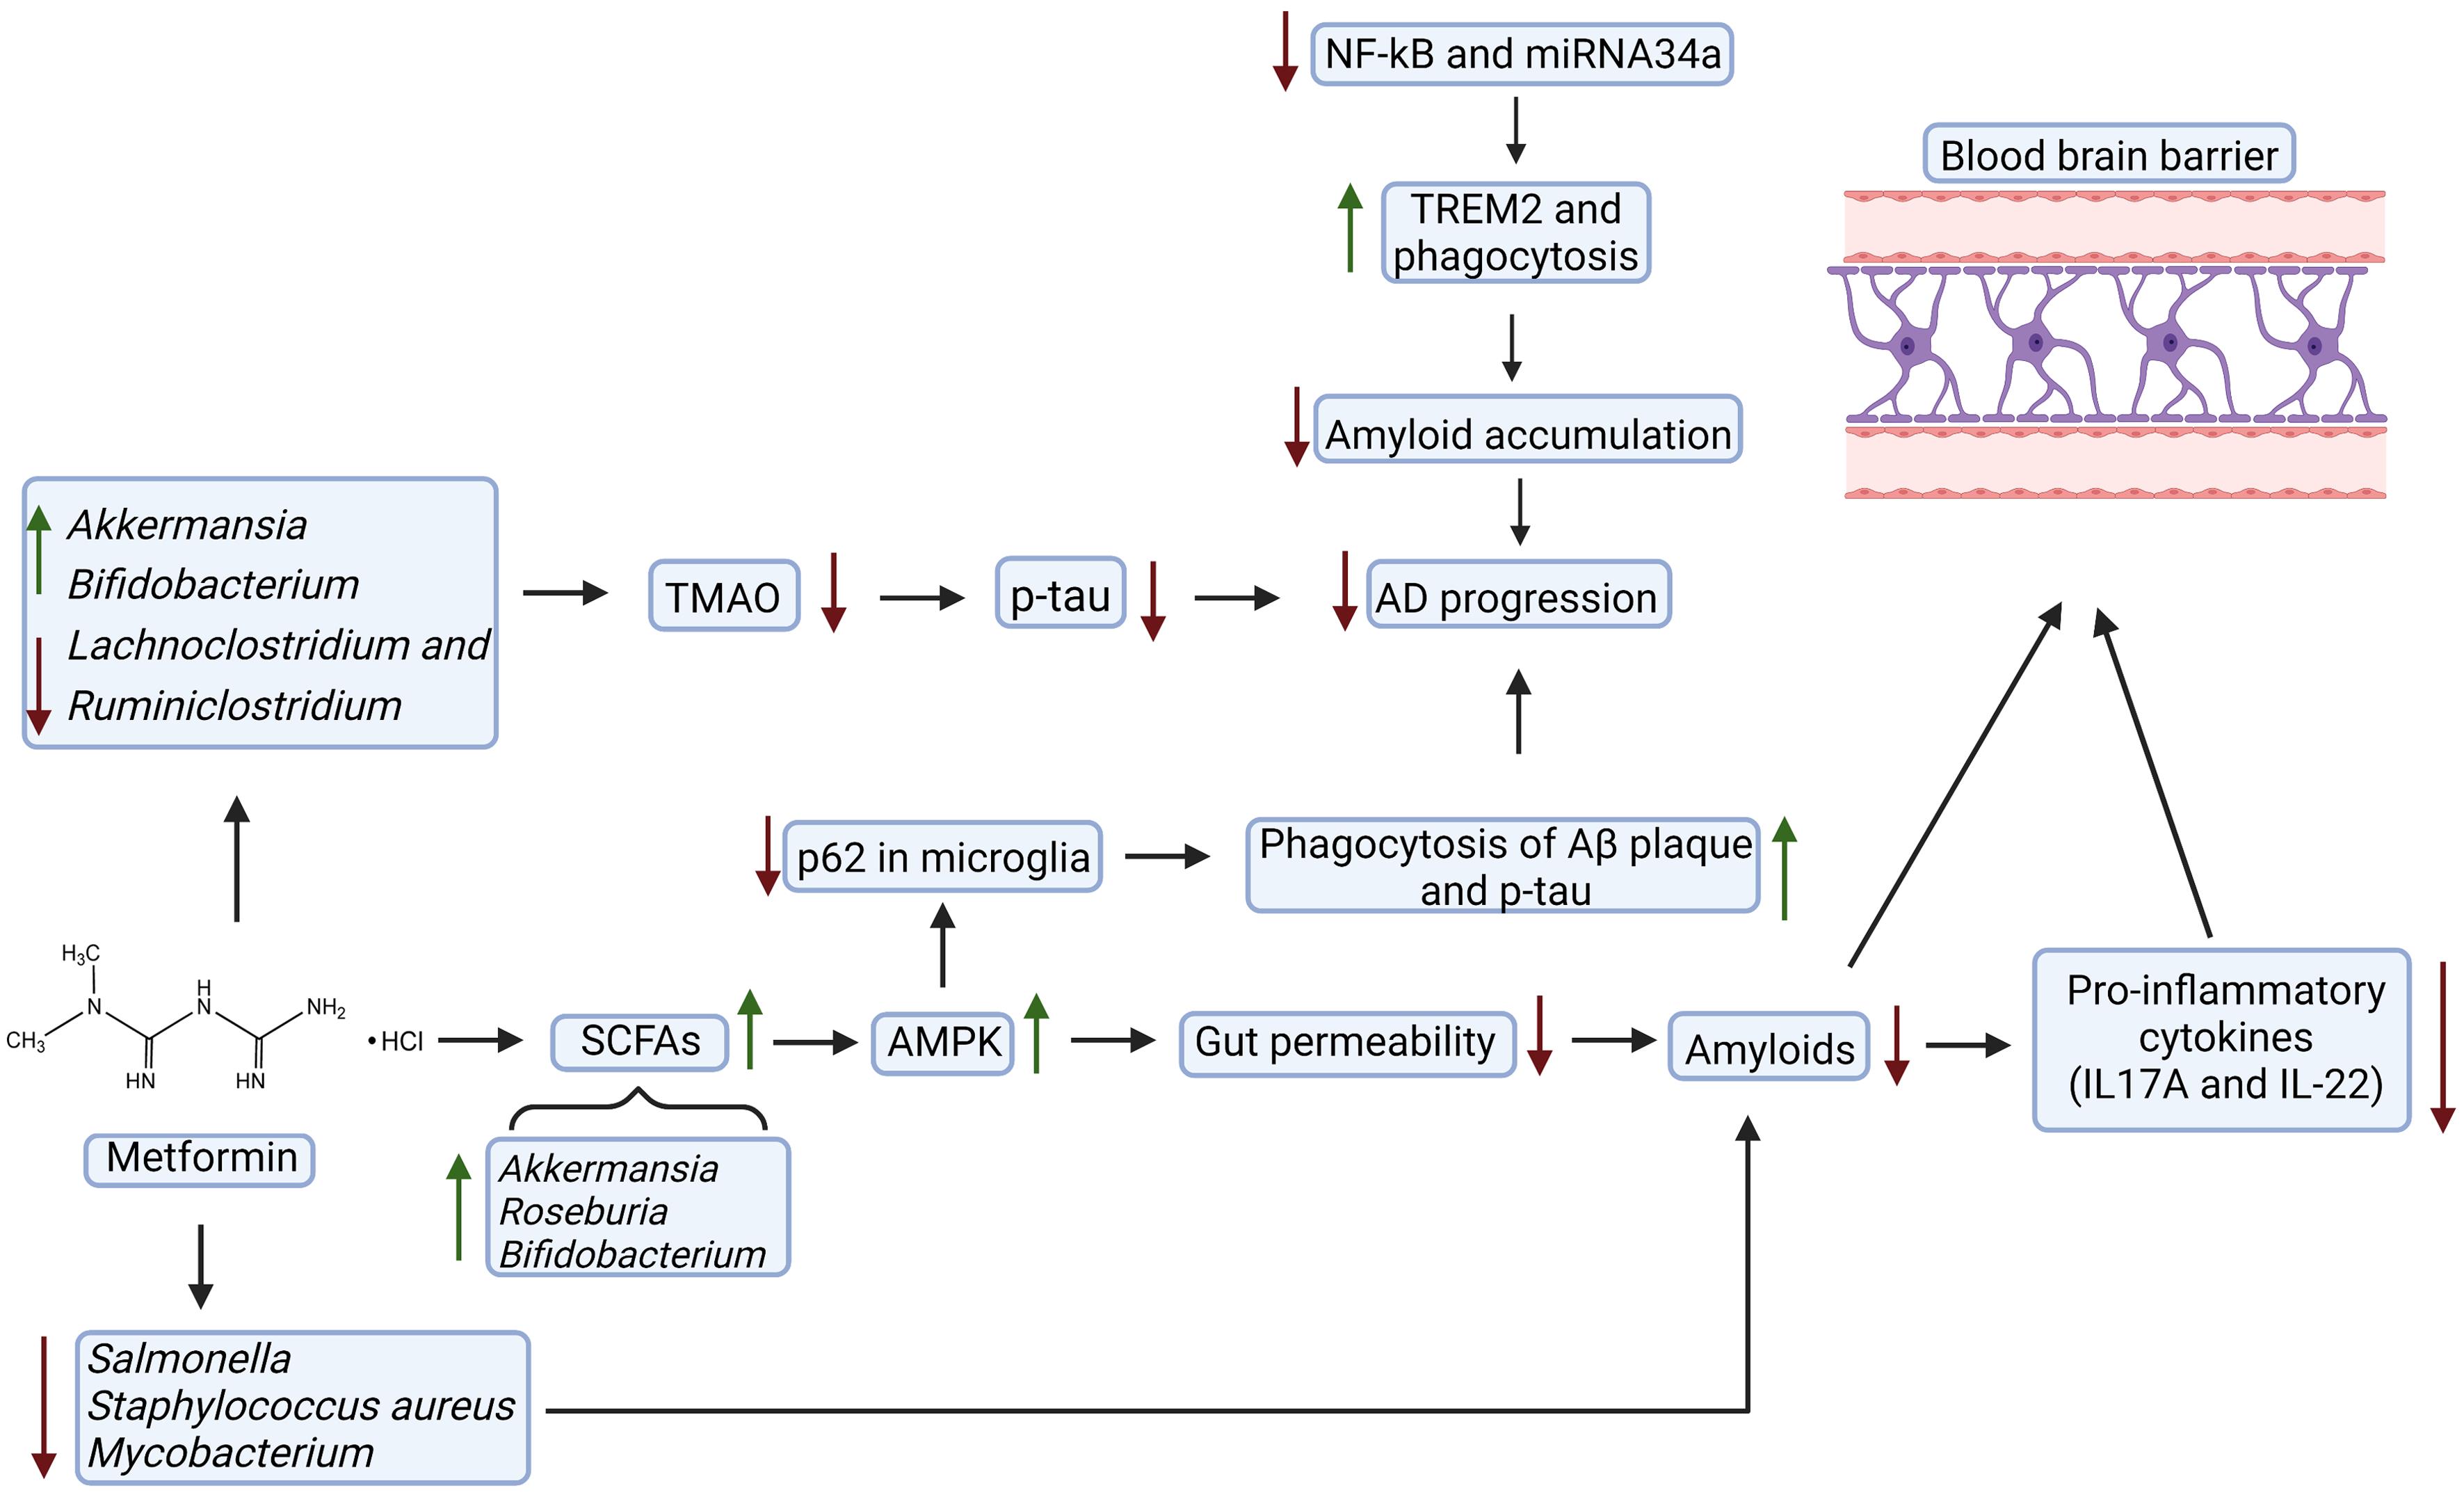 Metformin acts as an antagonist for AD progression.